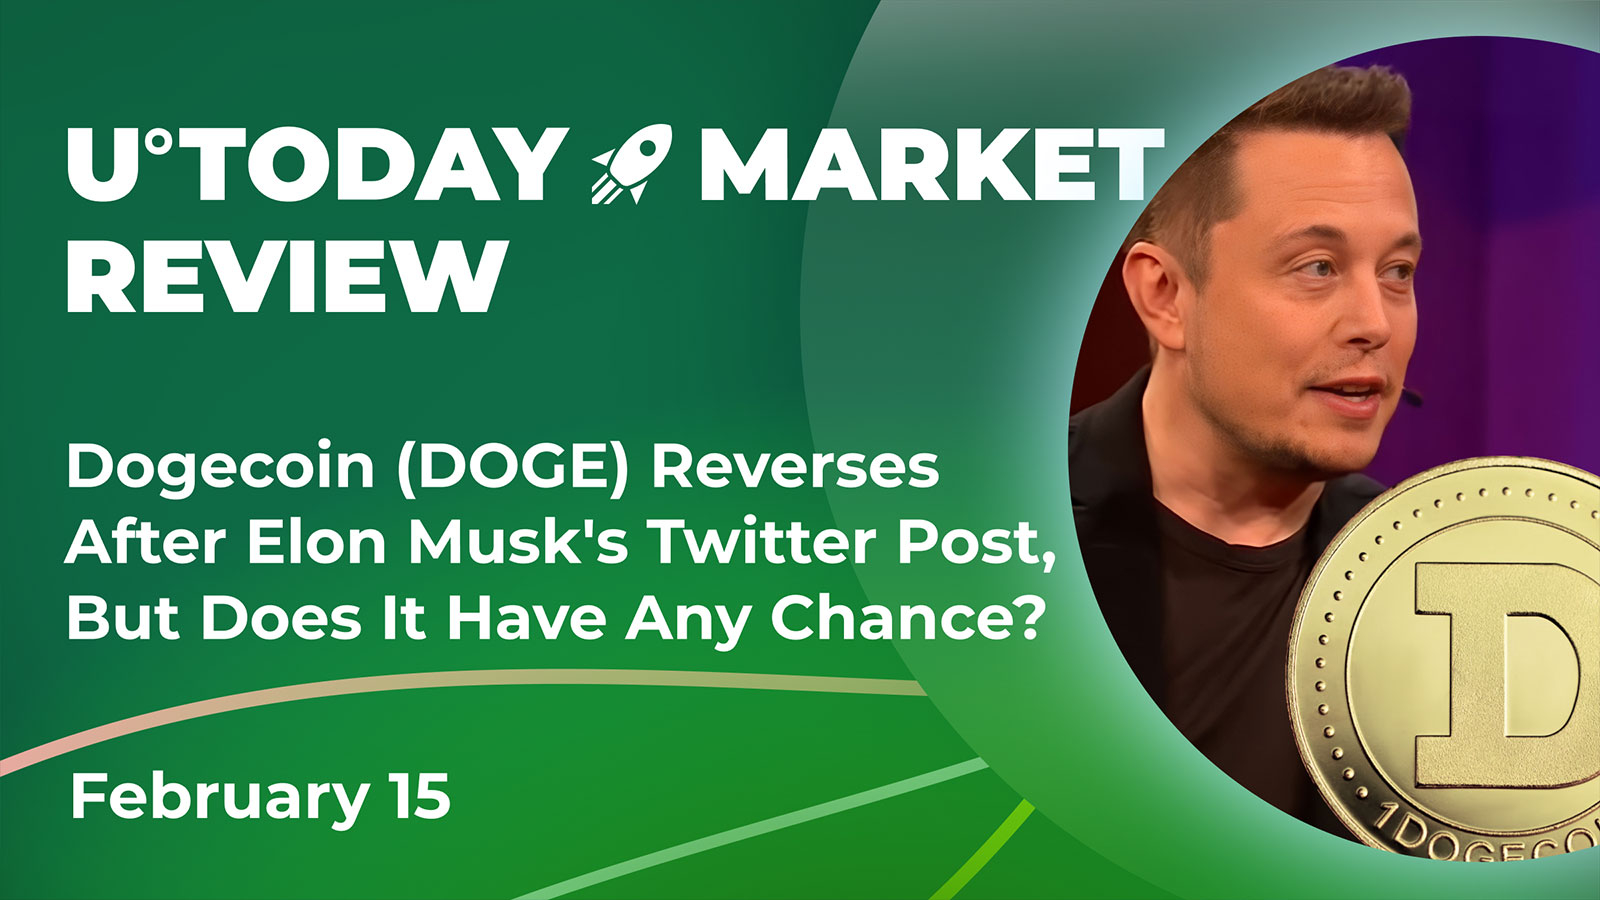 Dogecoin (DOGE) Reverses After Elon Musk's Twitter Post, But Does It Have Any Chance?